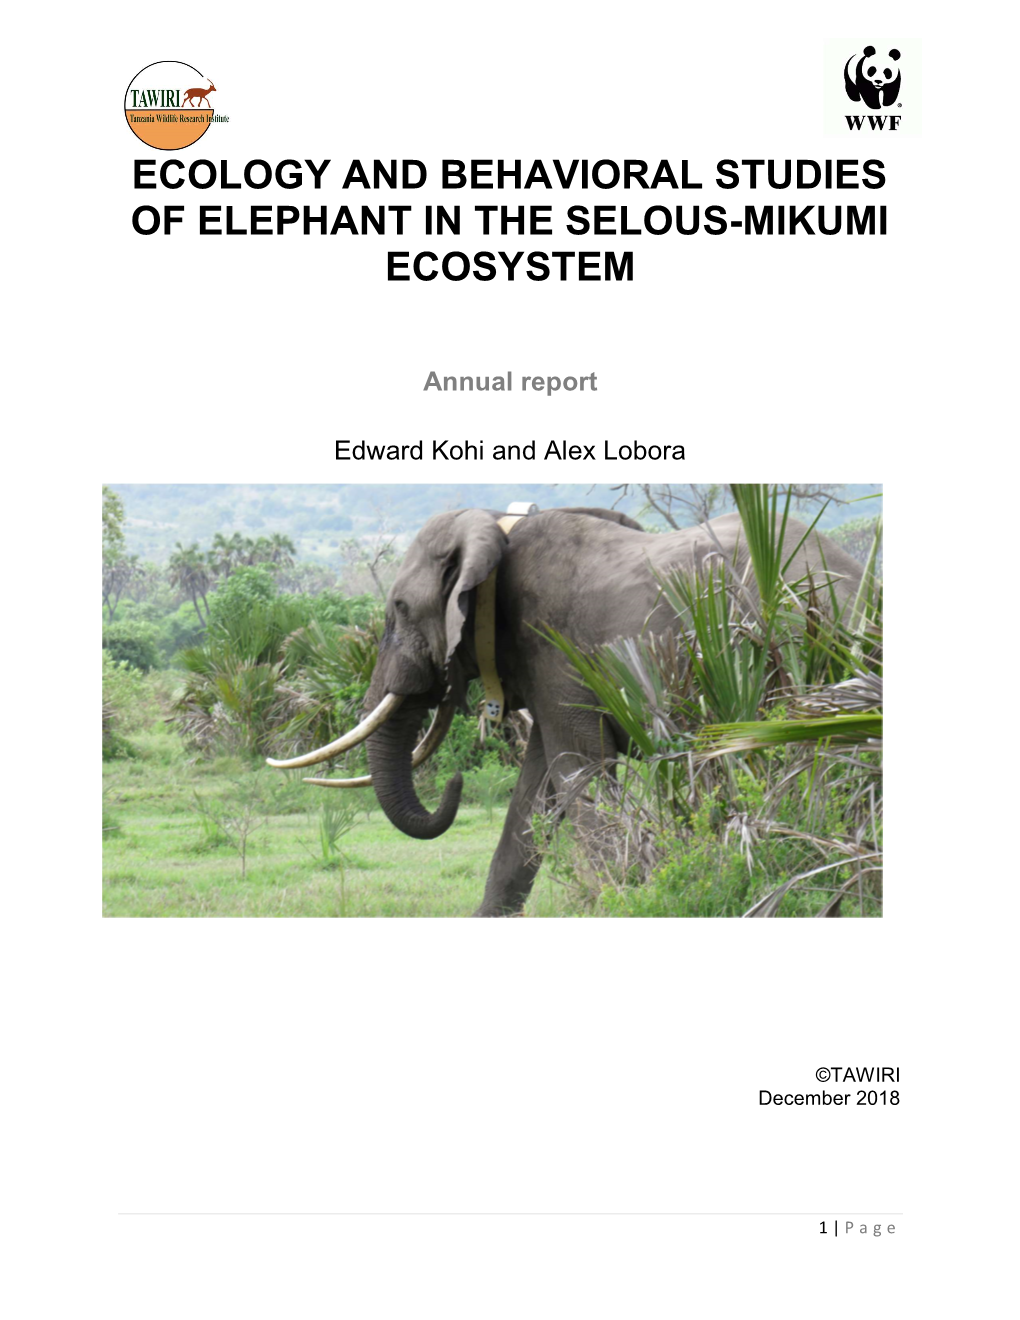 Ecology and Behavioral Studies of Elephant in the Selous-Mikumi Ecosystem